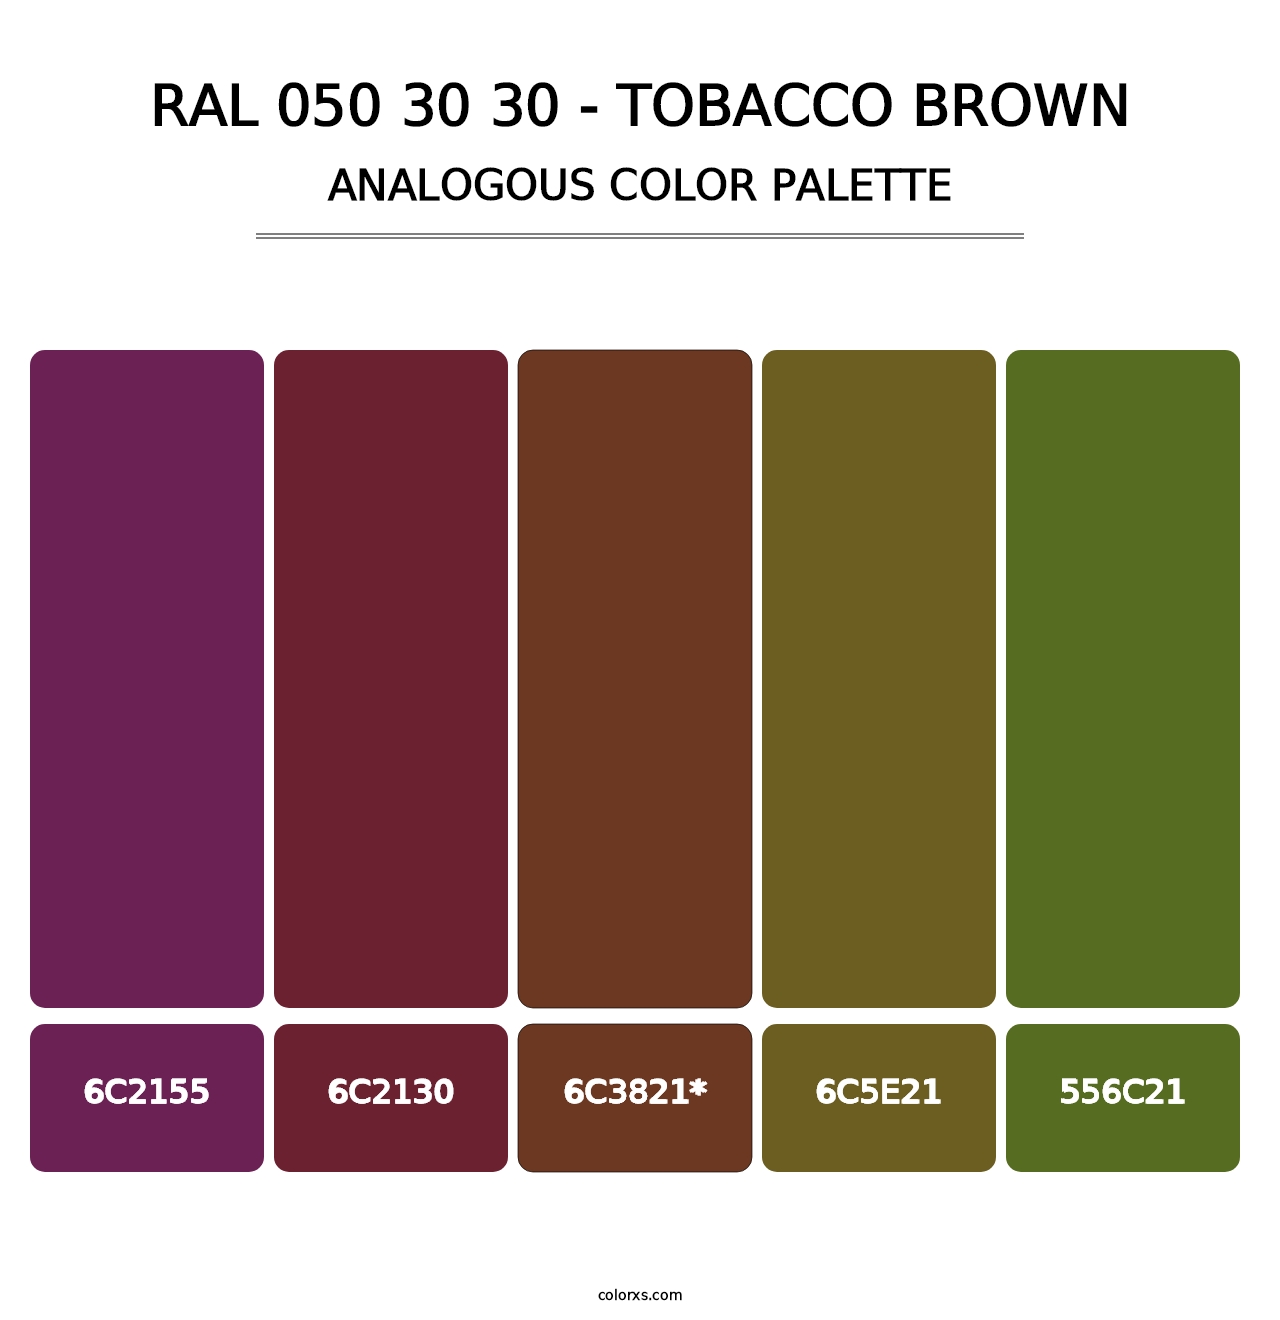 RAL 050 30 30 - Tobacco Brown - Analogous Color Palette